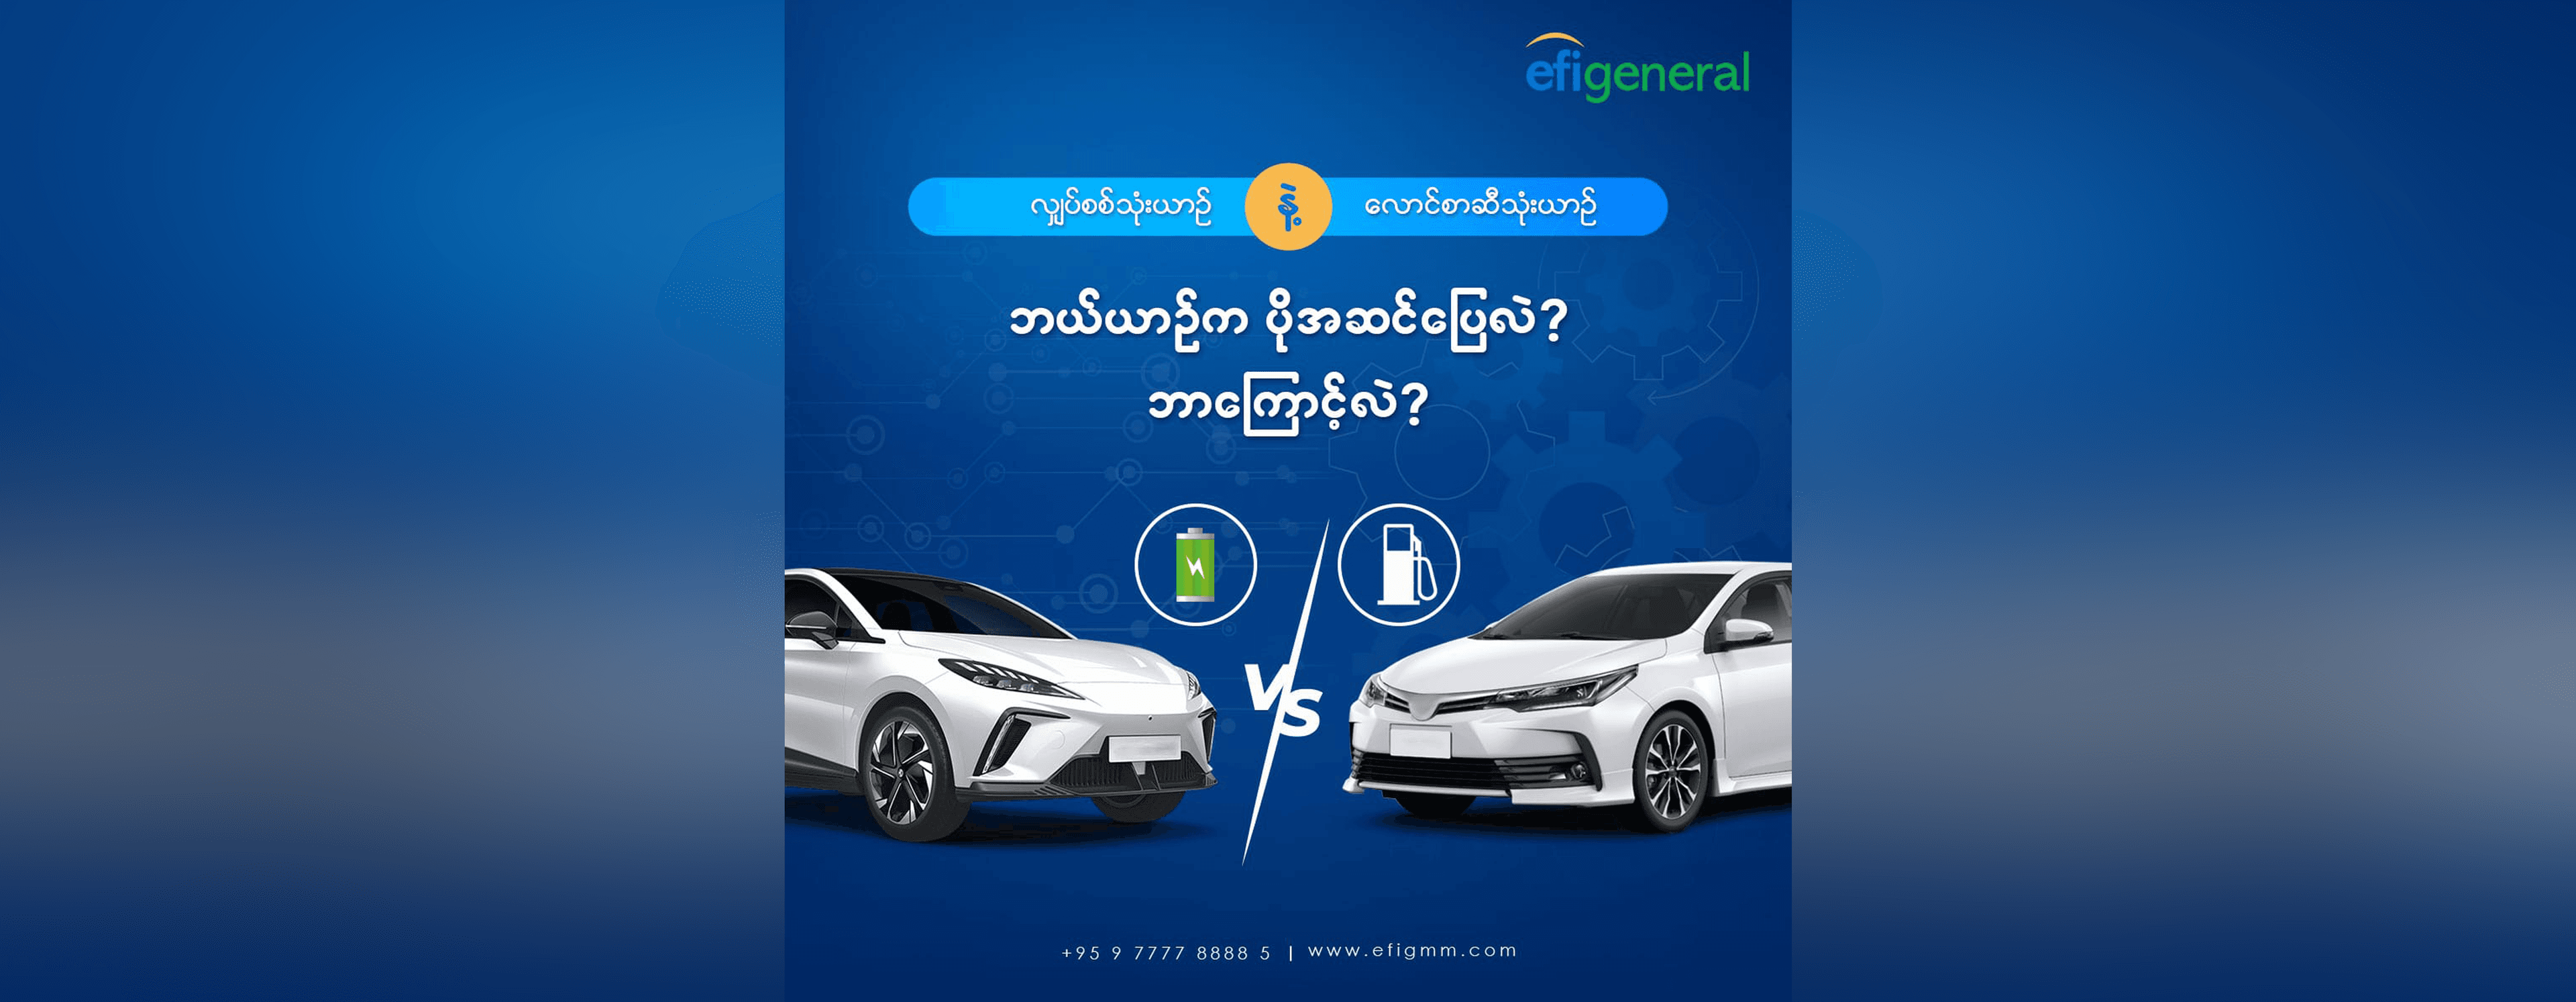 Fuel Vehicles or electric vehicles, which one is more convenient to use?  Why?